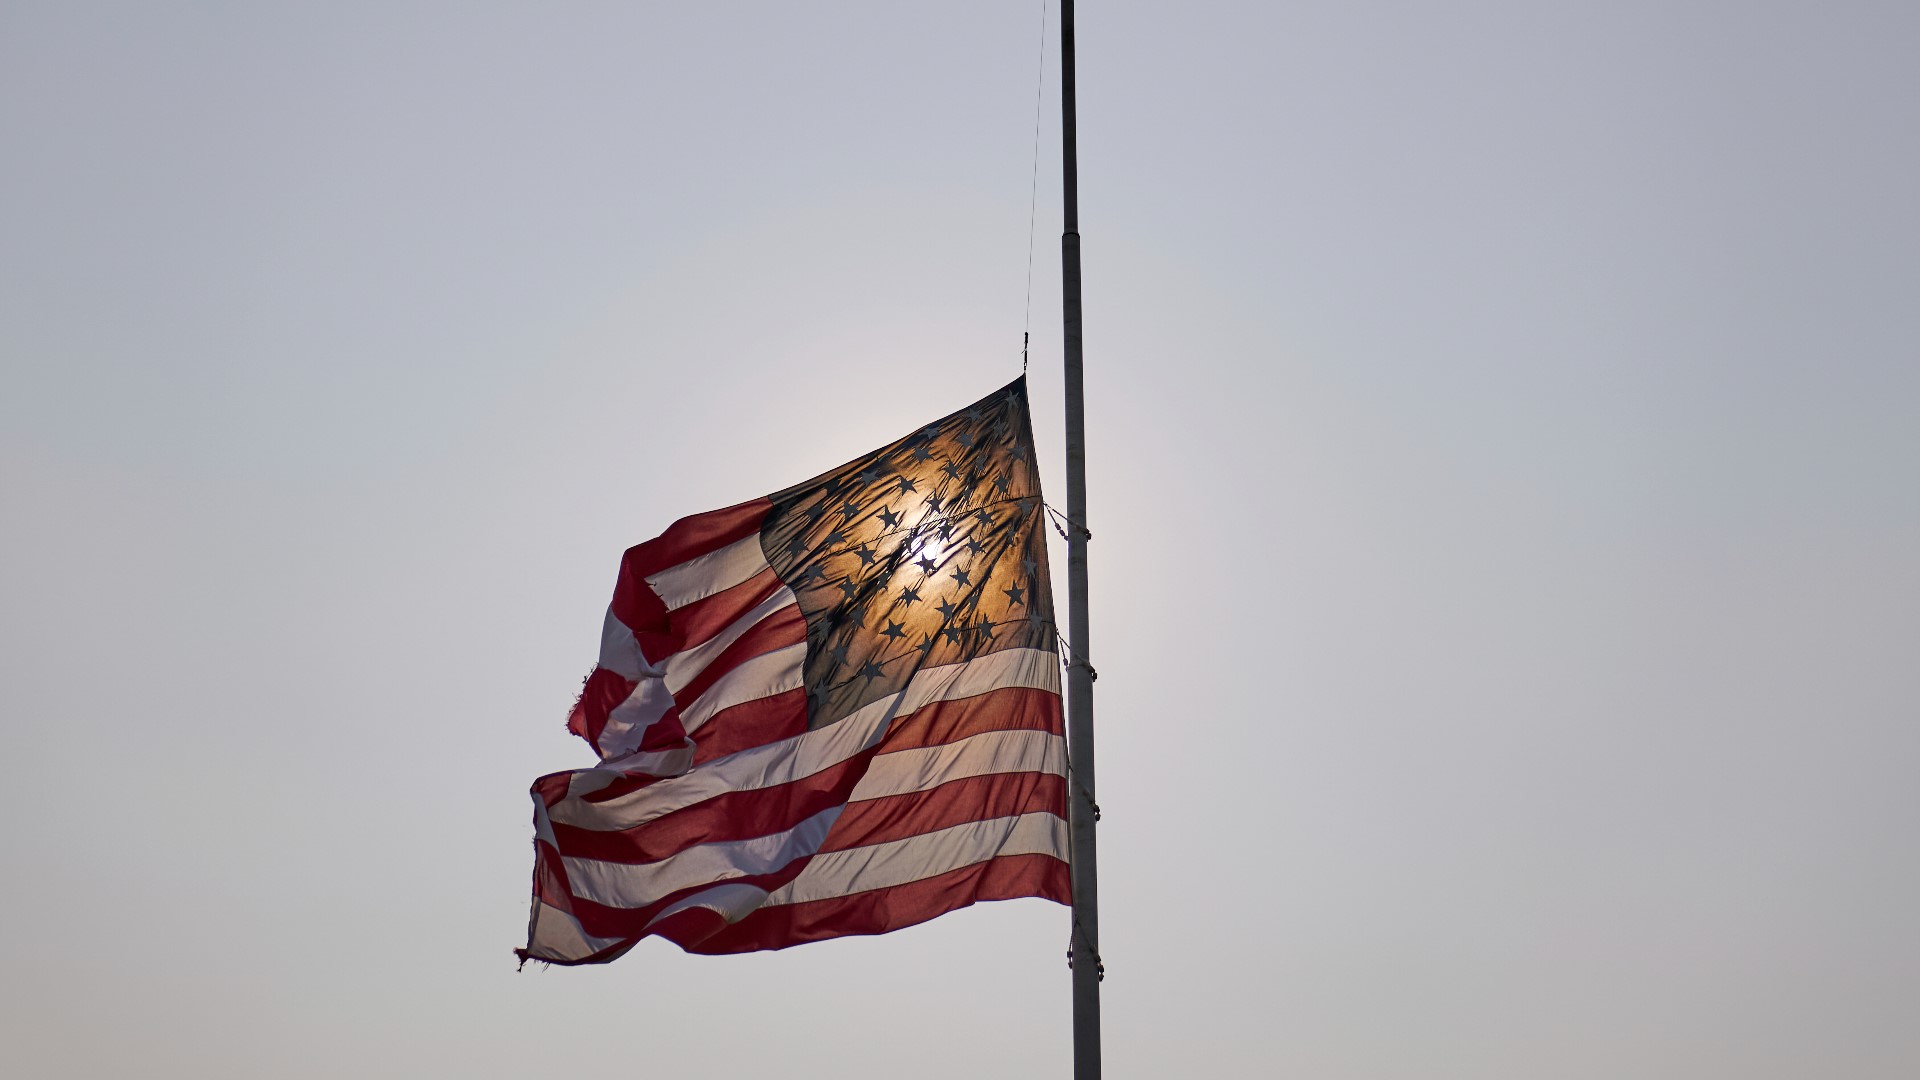 “Our hearts our heavy with the news that we lost two firefighters, Thomas ‘Tommy’ Hayes of Post Falls and Jared Bird of Anchorage, Alaska," Little's statement said.